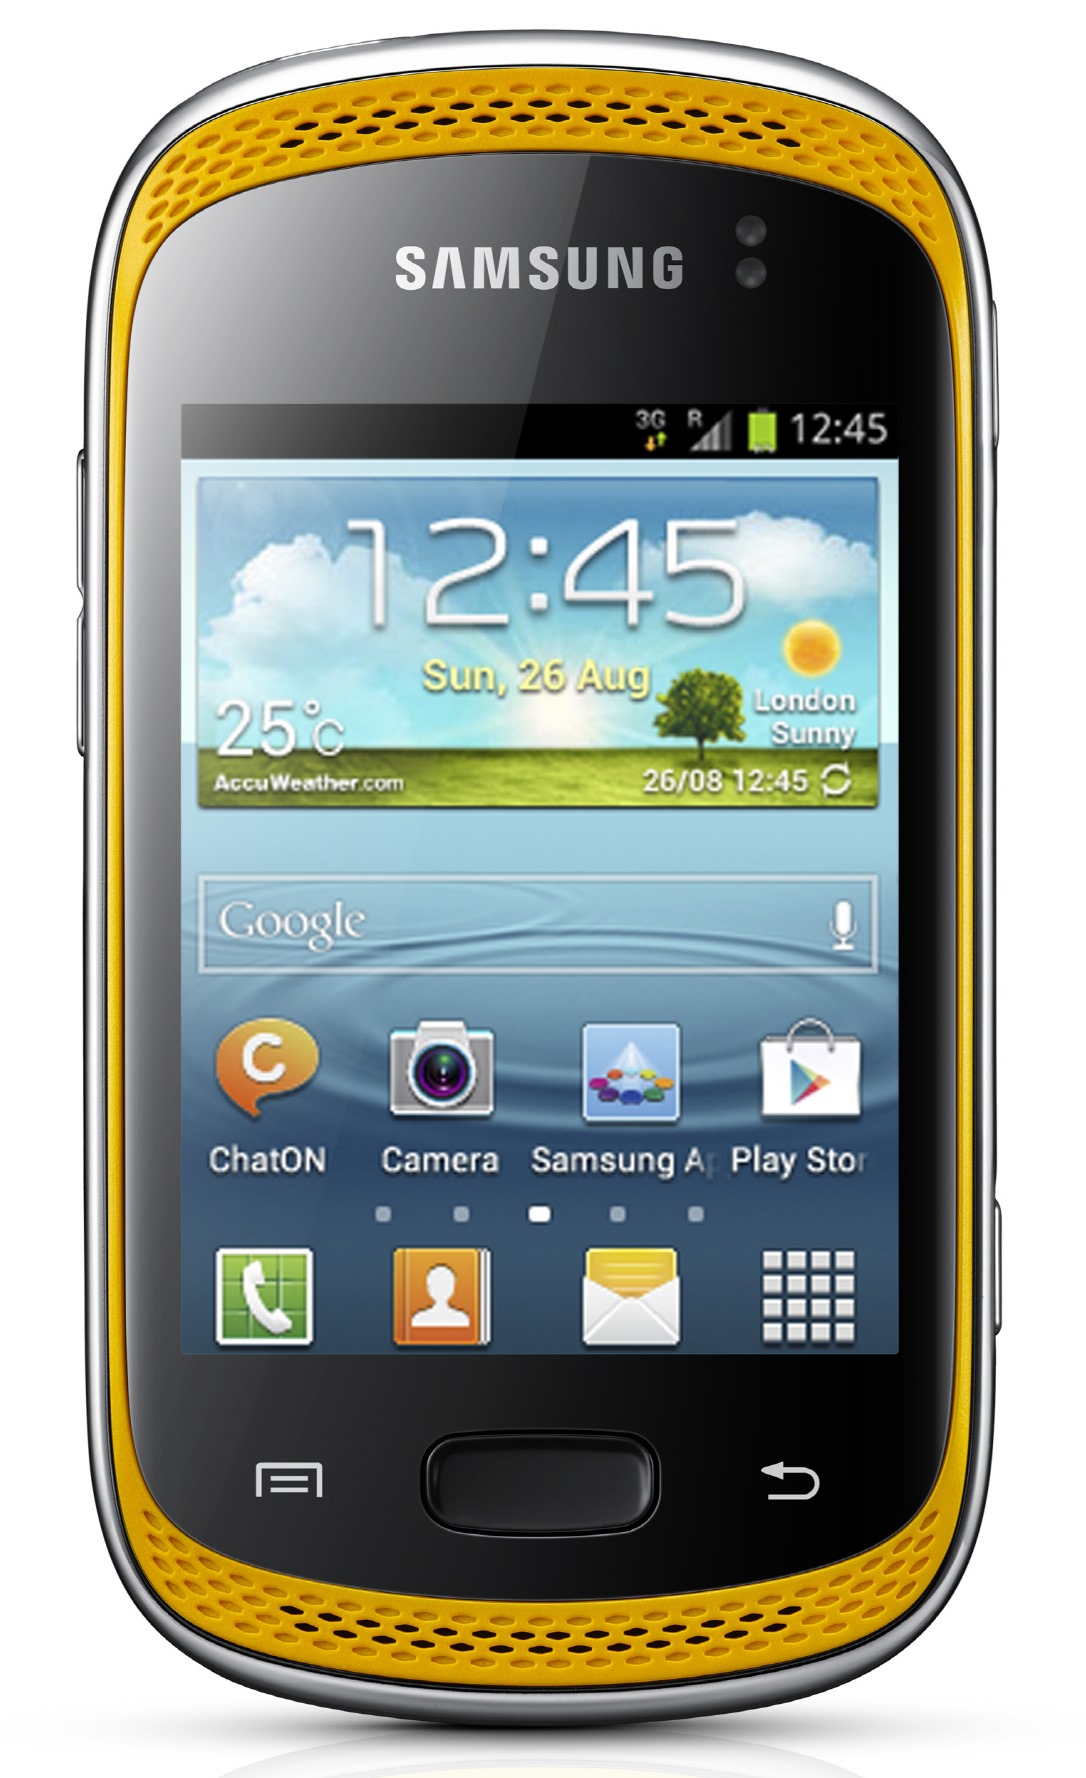 Samsung GALAXY Music Duos Full Specifications And Price Details - Gadgetian